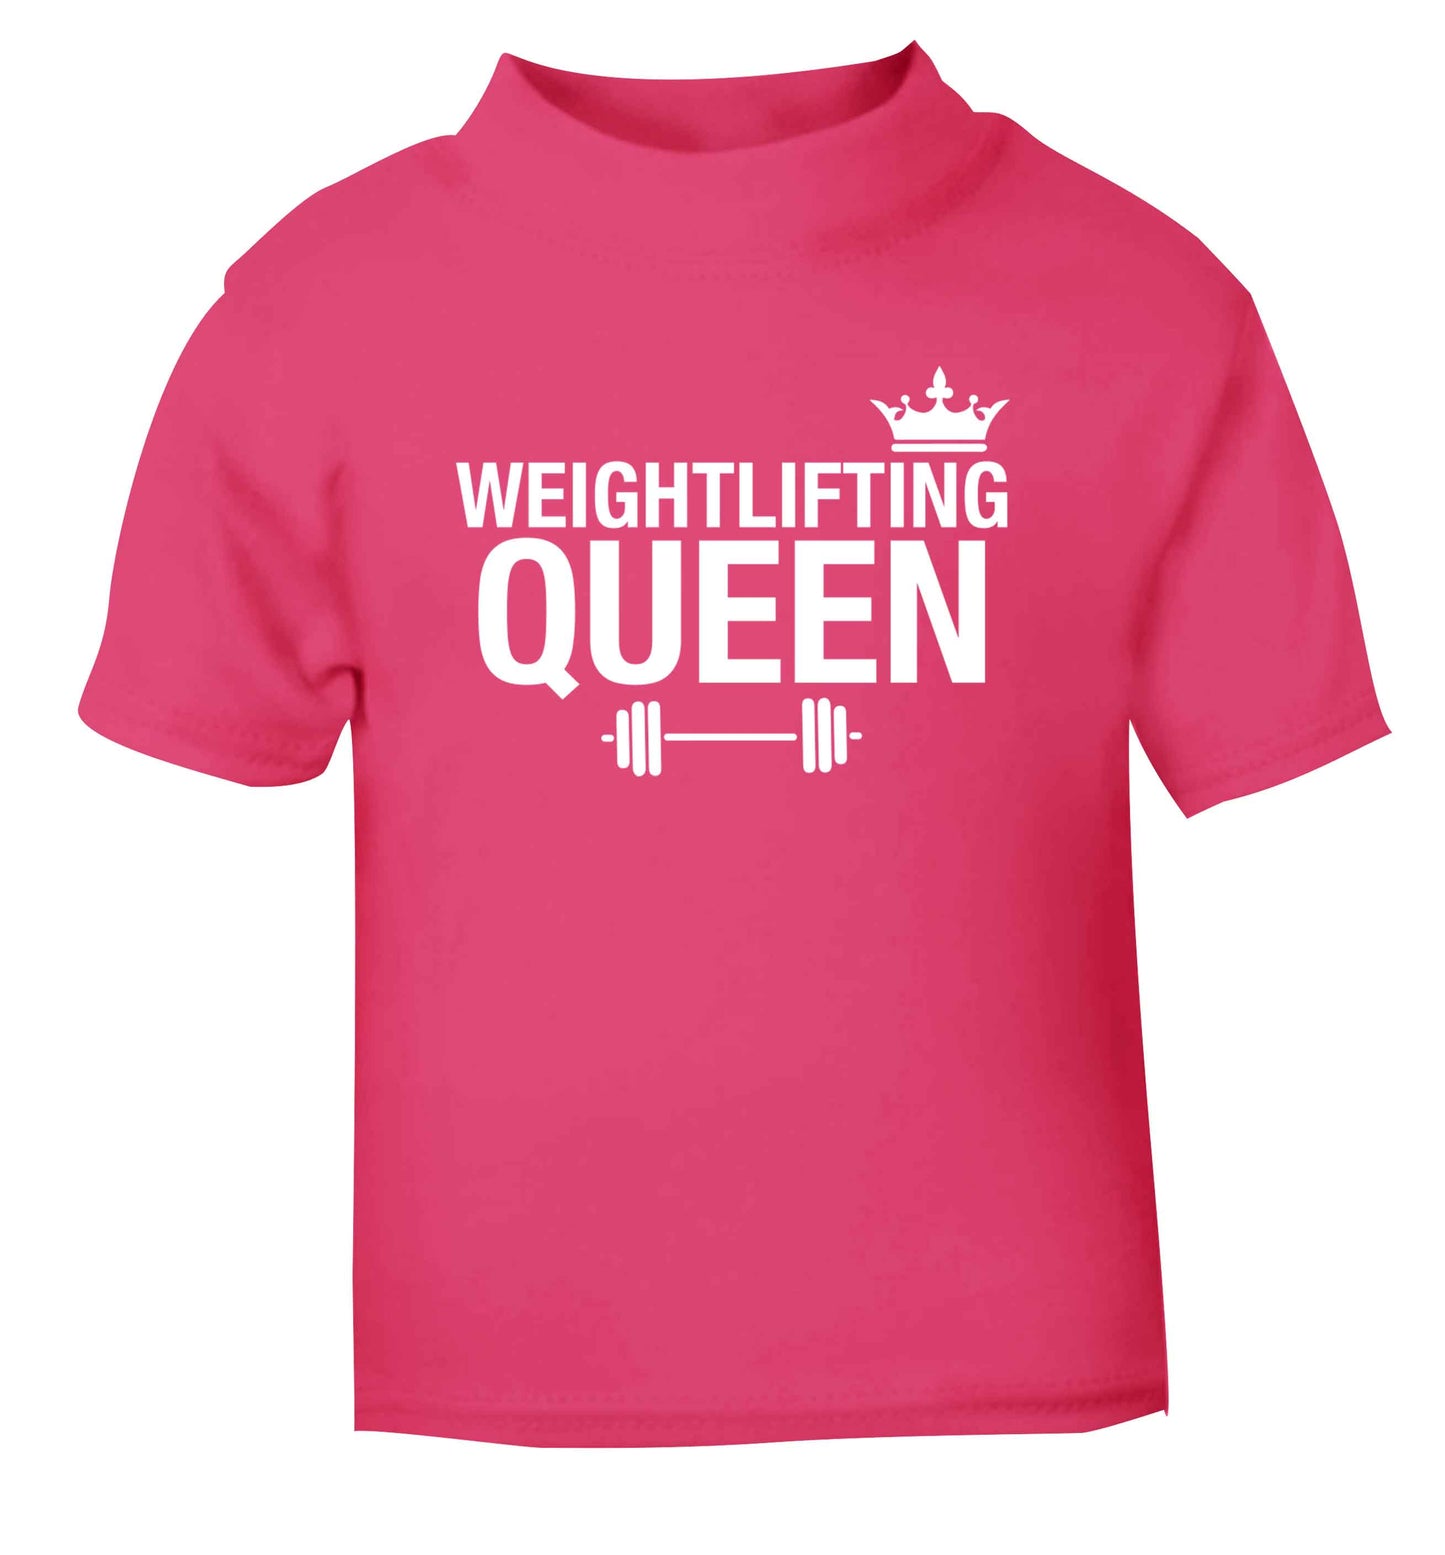 Weightlifting Queen pink Baby Toddler Tshirt 2 Years